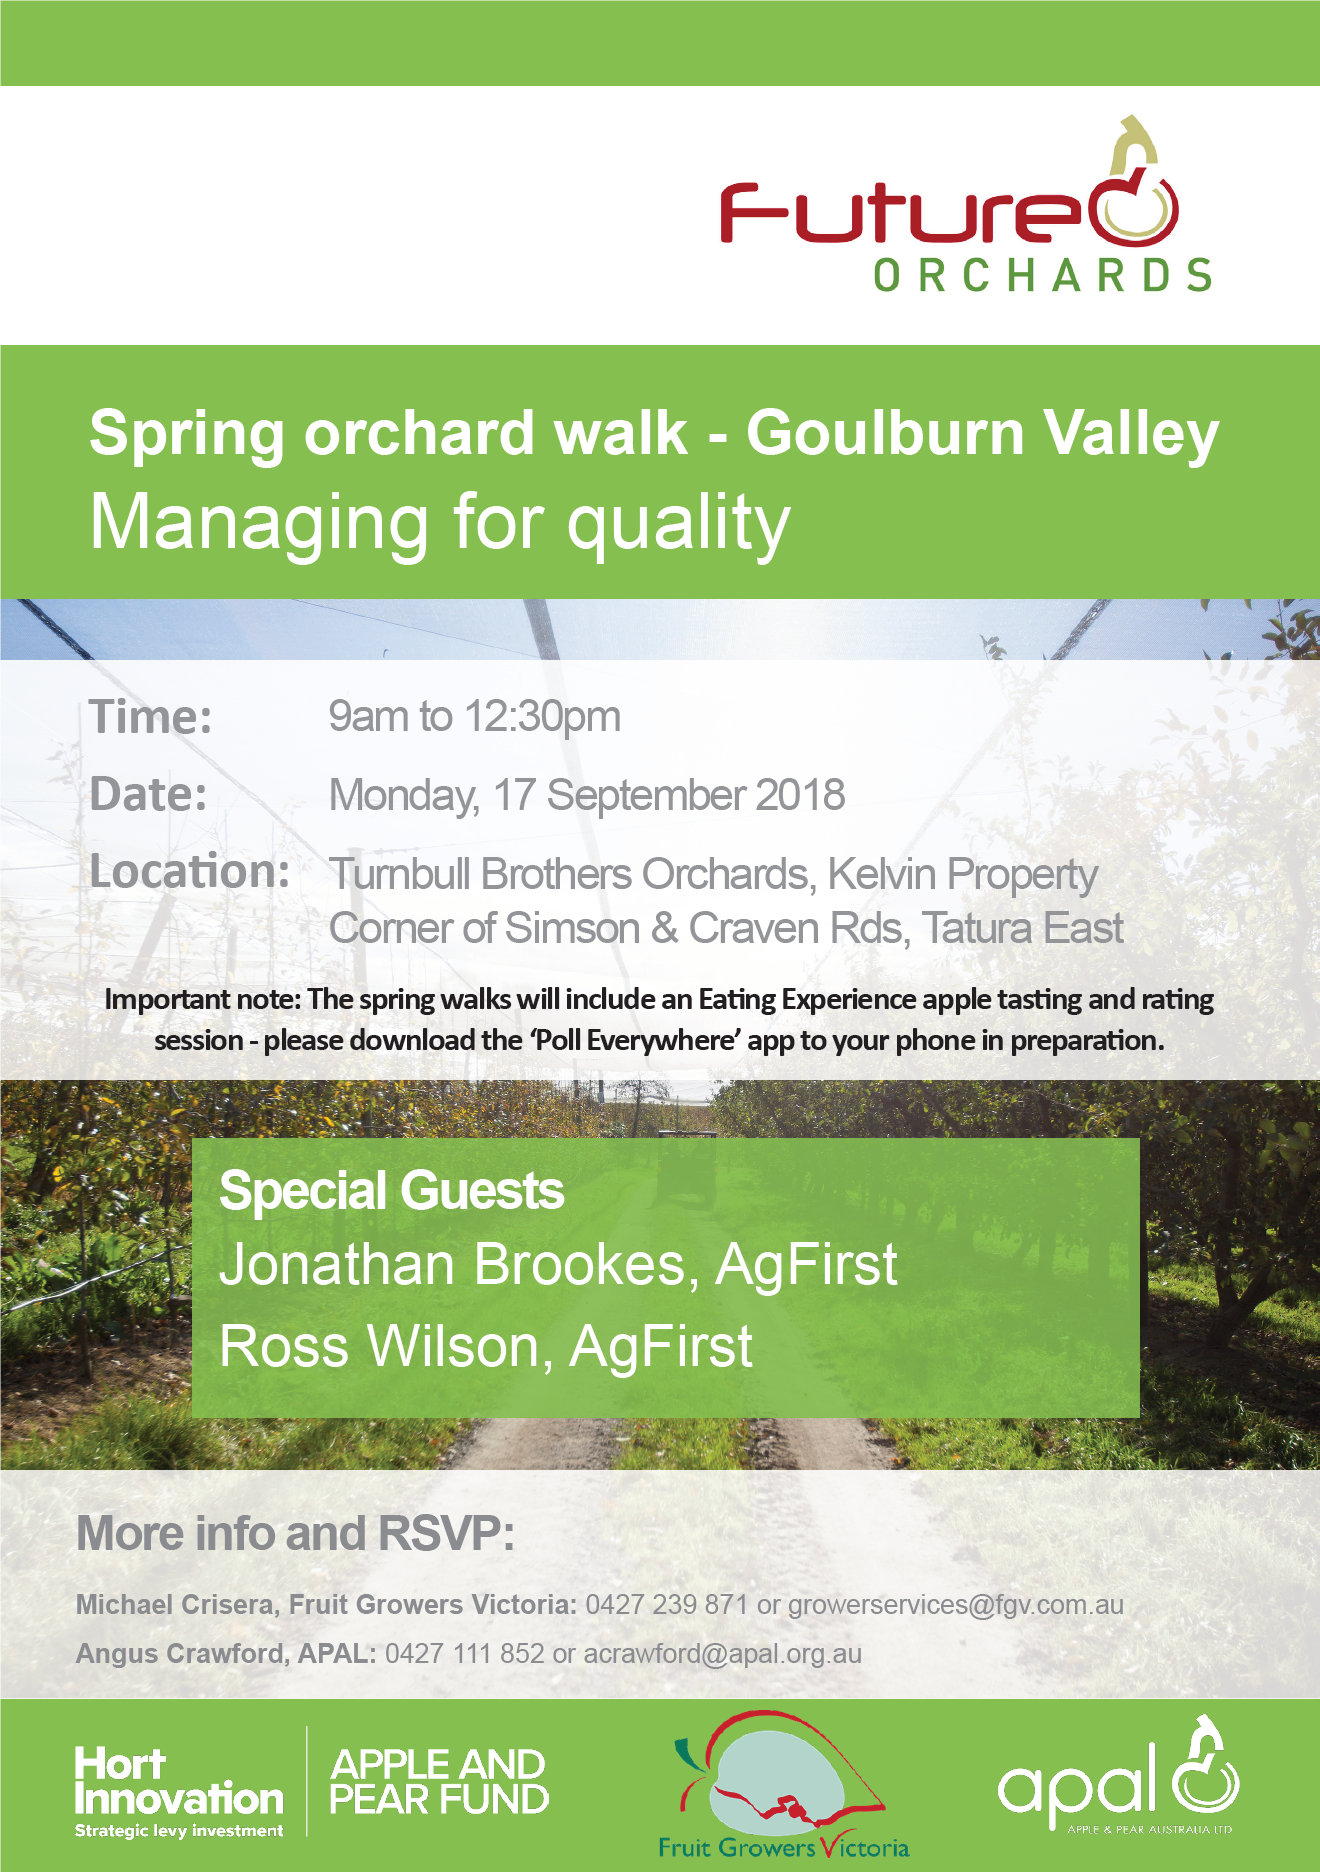 Future Orchards 'Spring Orchard Walk'- Monday 17th September 2018 from 9:00am-12:30pm to be held at Turnbull Bros Orchards, Corner of Simpson & Craven Roads, Tatura East